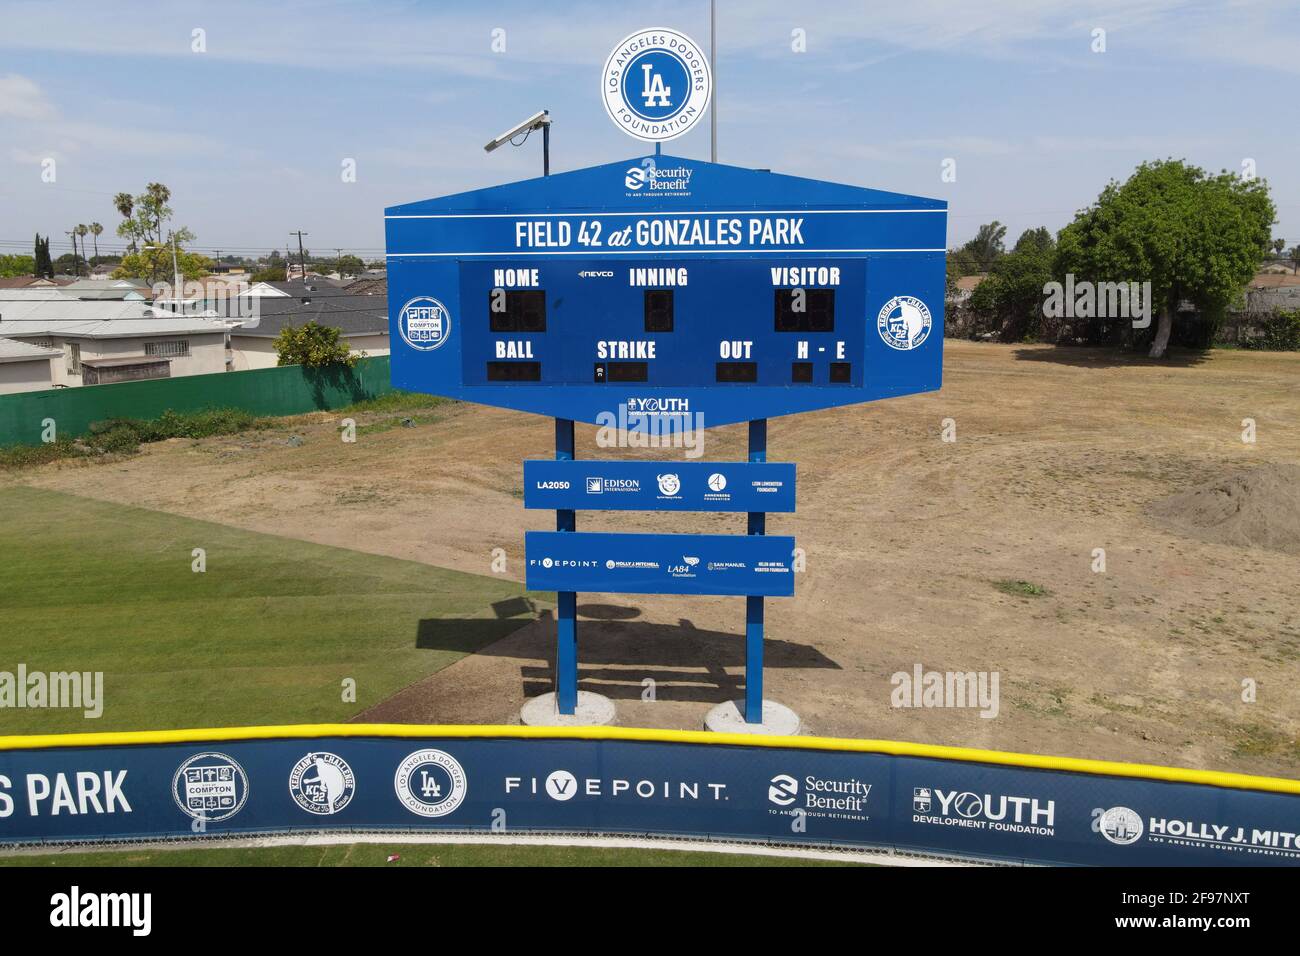 A general view of scoreboard at Field 42 at Los Angeles Dodgers Dreamfields project at Gonzales Park on Jackie Robinson Day, Thursday, April 15, 2021, Stock Photo